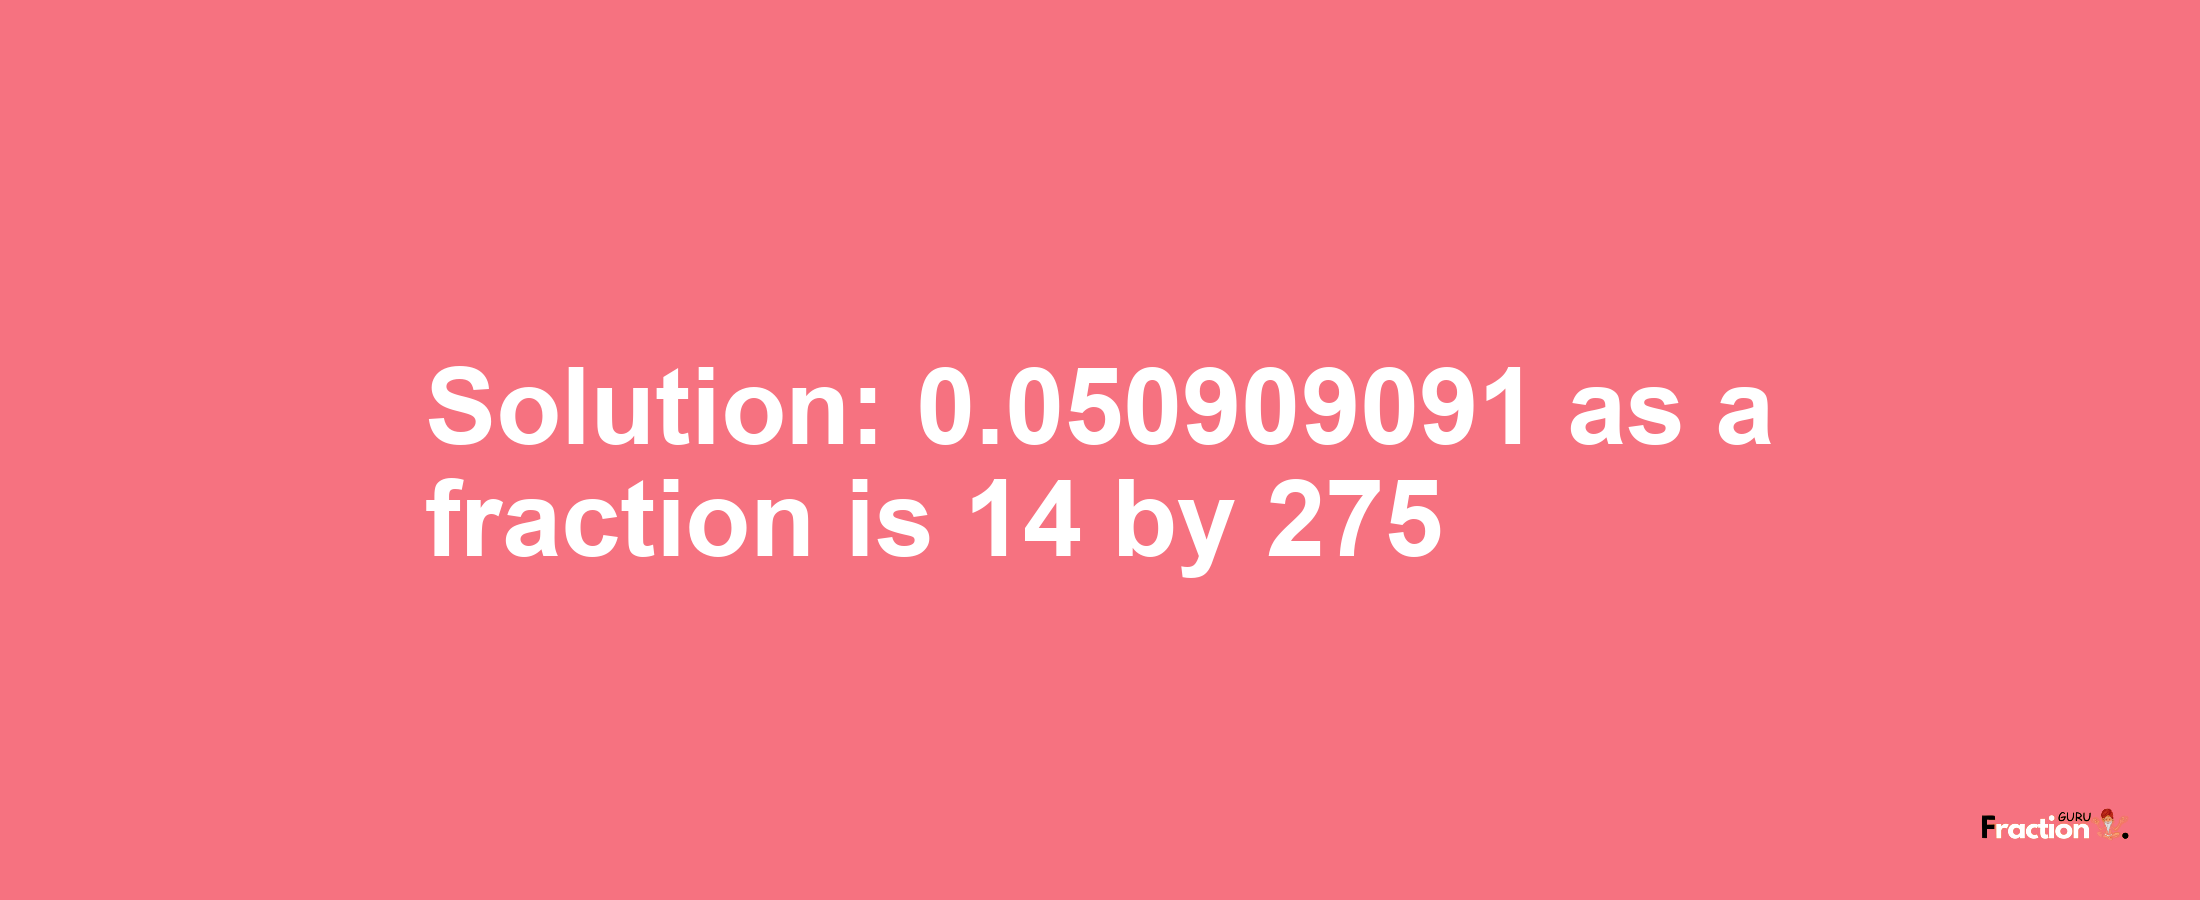 Solution:0.050909091 as a fraction is 14/275